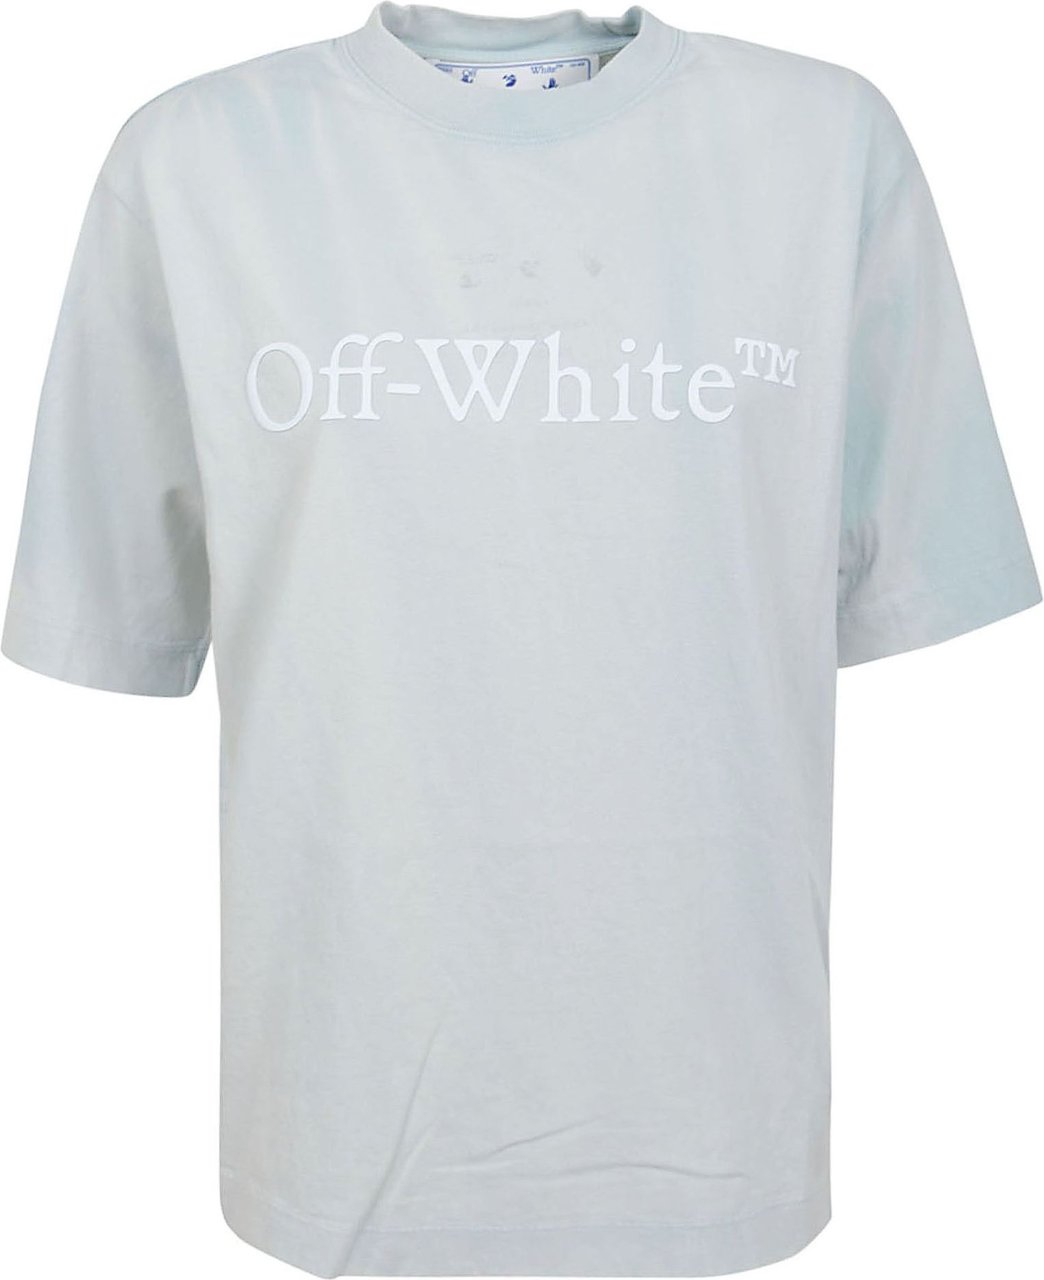 OFF-WHITE Laundry Skate S/S Tee Baby Bl Divers